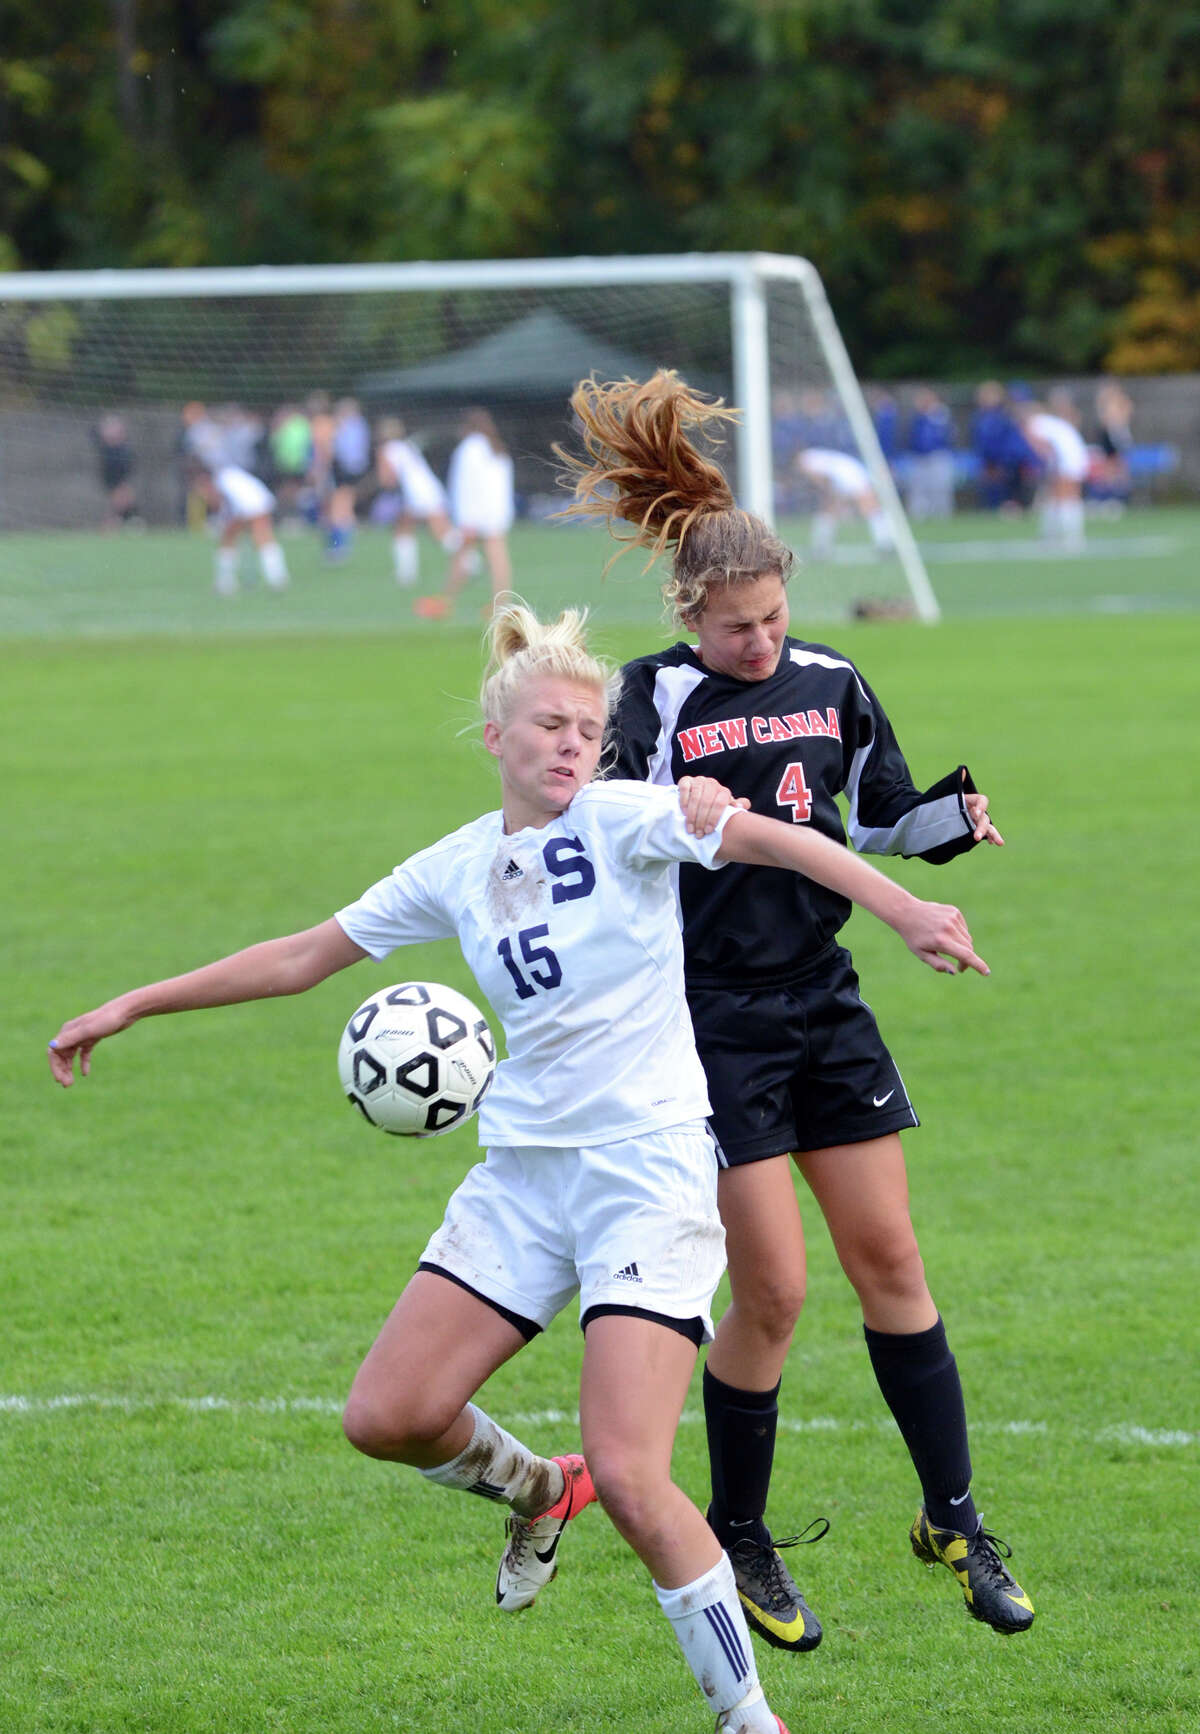 New Canaan's Marina Braccio (4) challenges Staples' Ryan Kirshner (15) for the ball during the girls soccer game at Loeffler Field at Staples High School in Westport on Tuesday, Oct. 23, 2012.